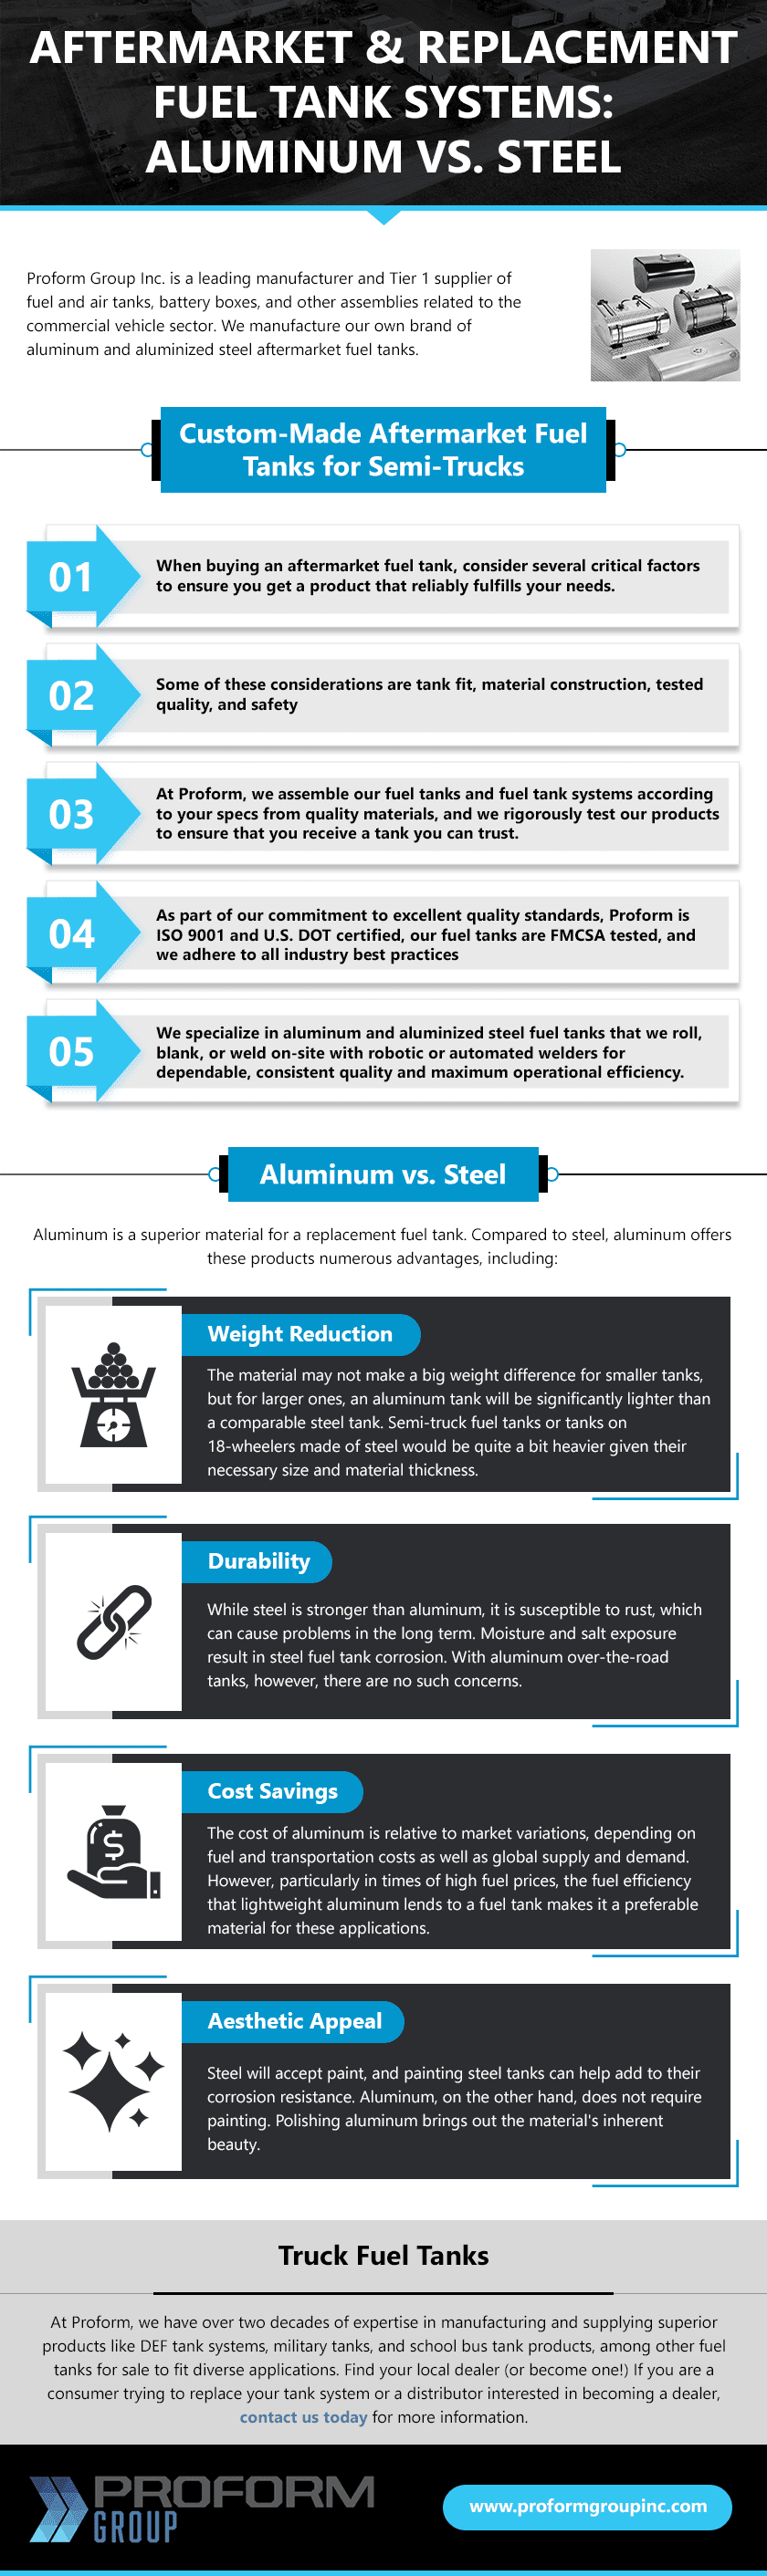 Aftermarket & Replacement Fuel Tank Systems: Aluminum Vs. Steel